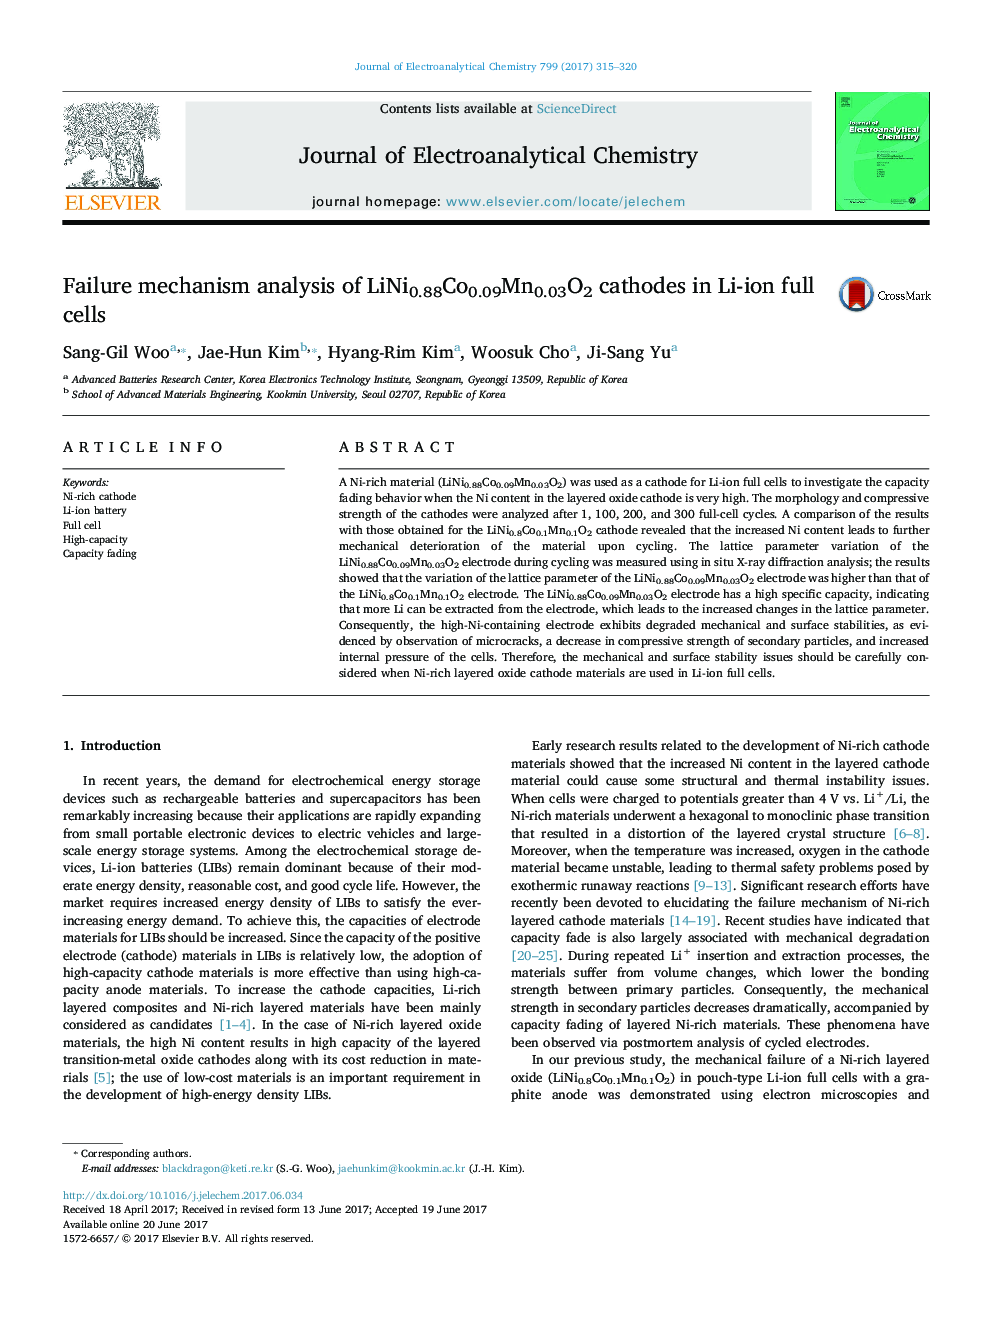 Failure mechanism analysis of LiNi0.88Co0.09Mn0.03O2 cathodes in Li-ion full cells